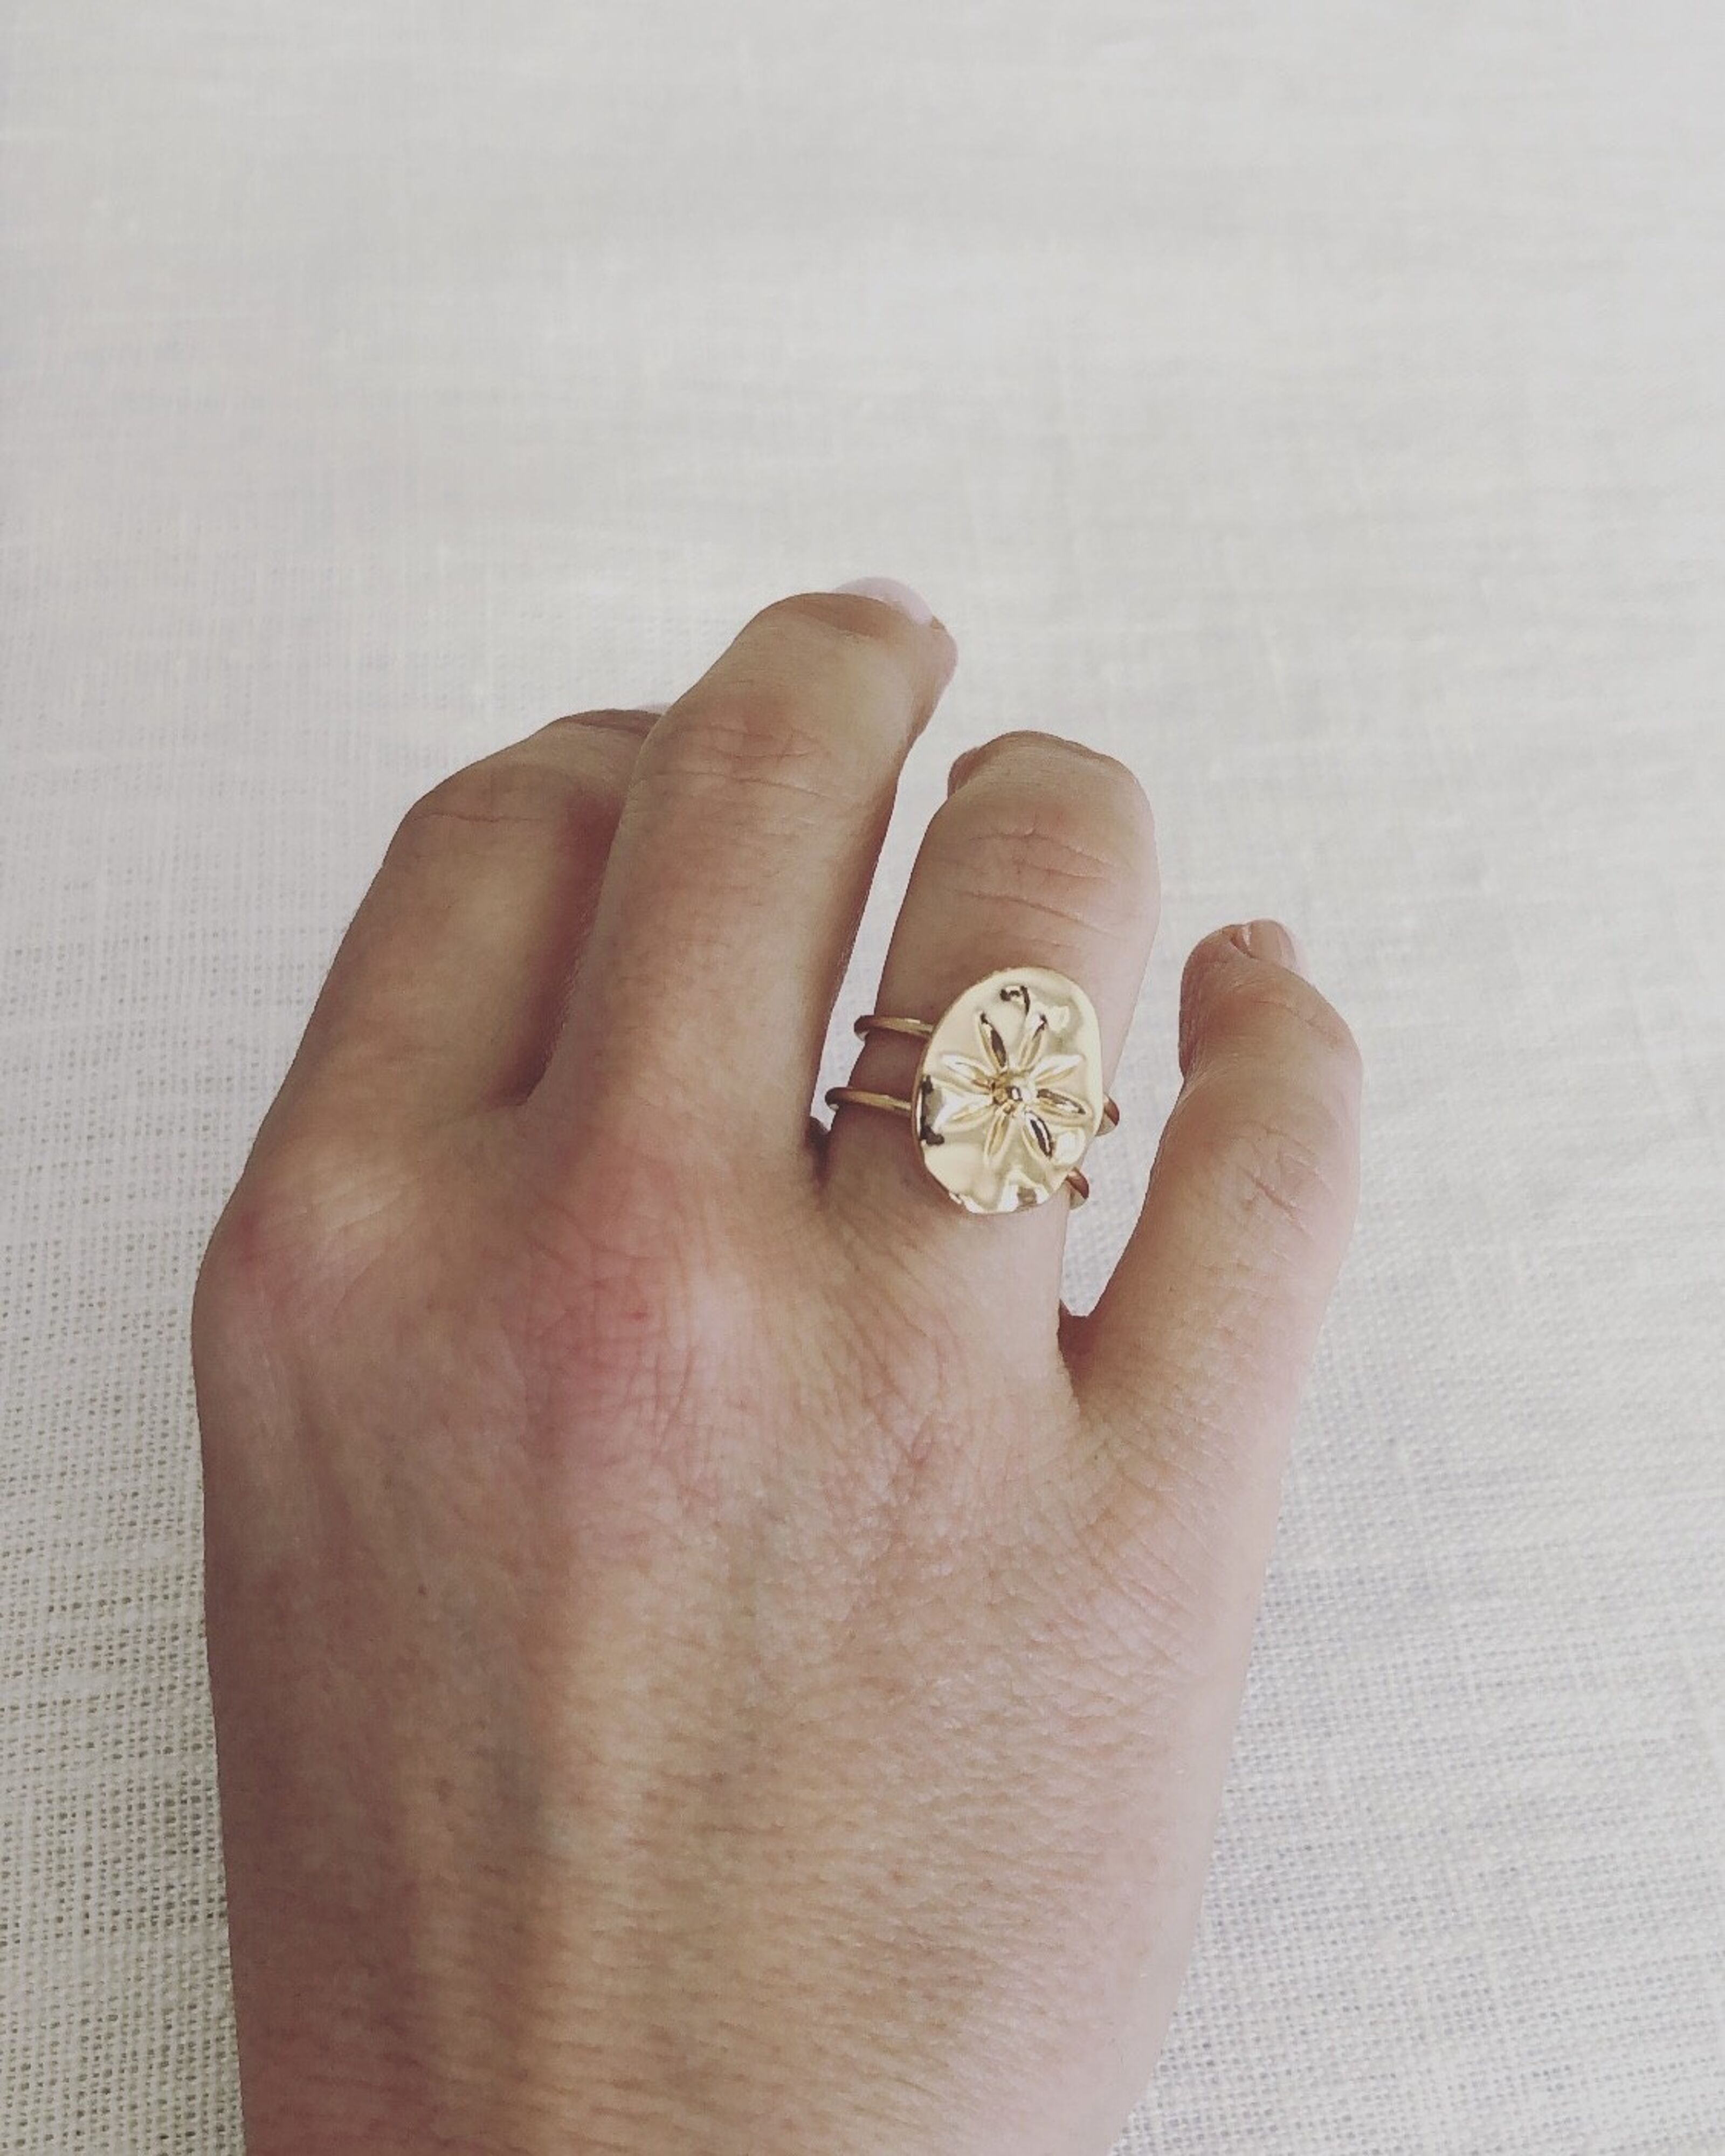 Luyu brass ring - Bagues or, pour elle, laiton, coton